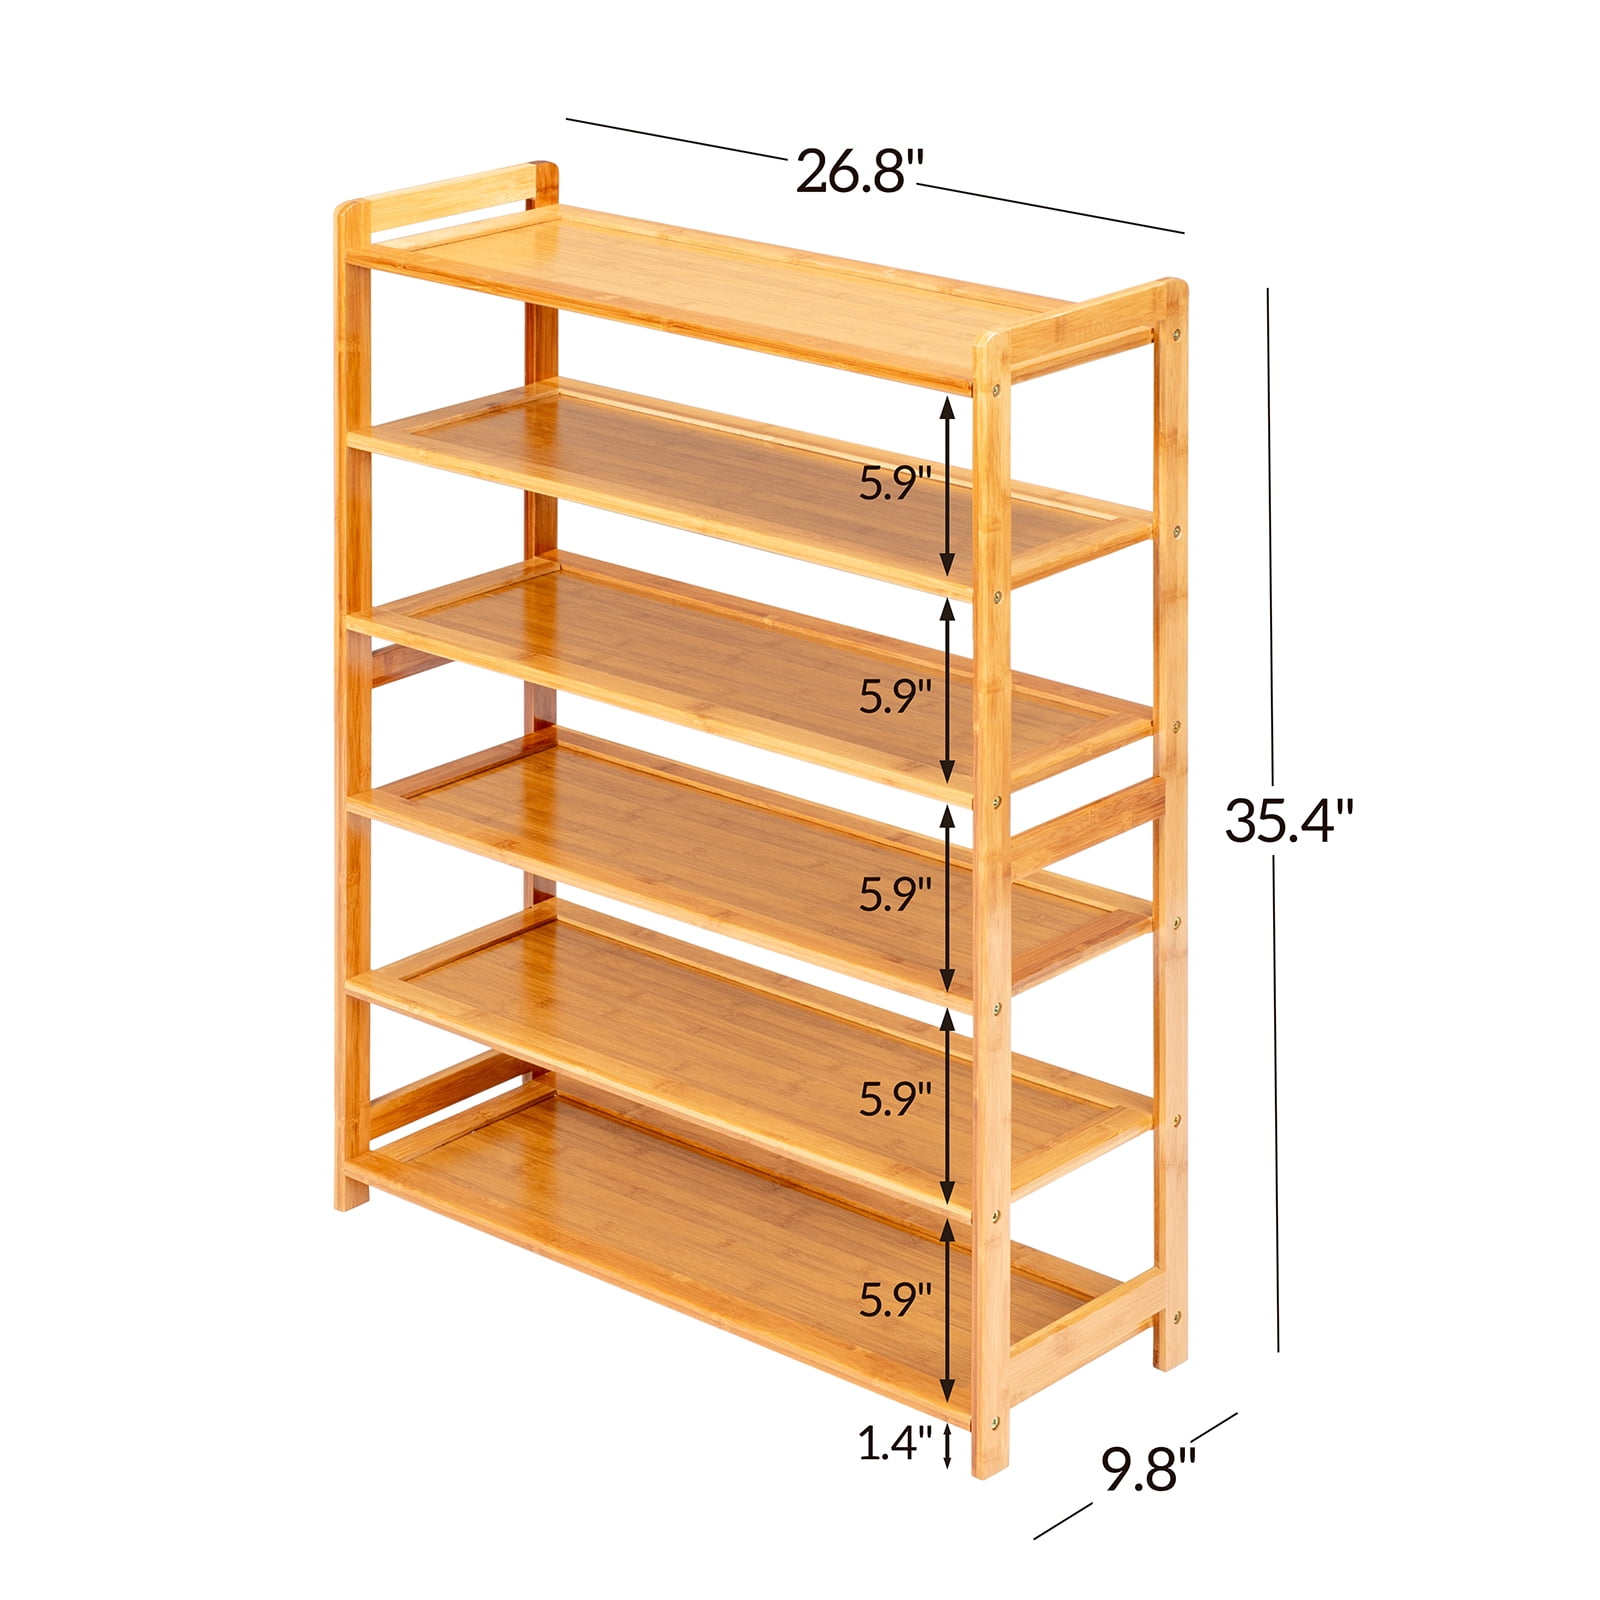 Mdf Wooden Shoe Rack + Two Drawer-9 Tiers + Free Bed Spread | Konga Online  Shopping